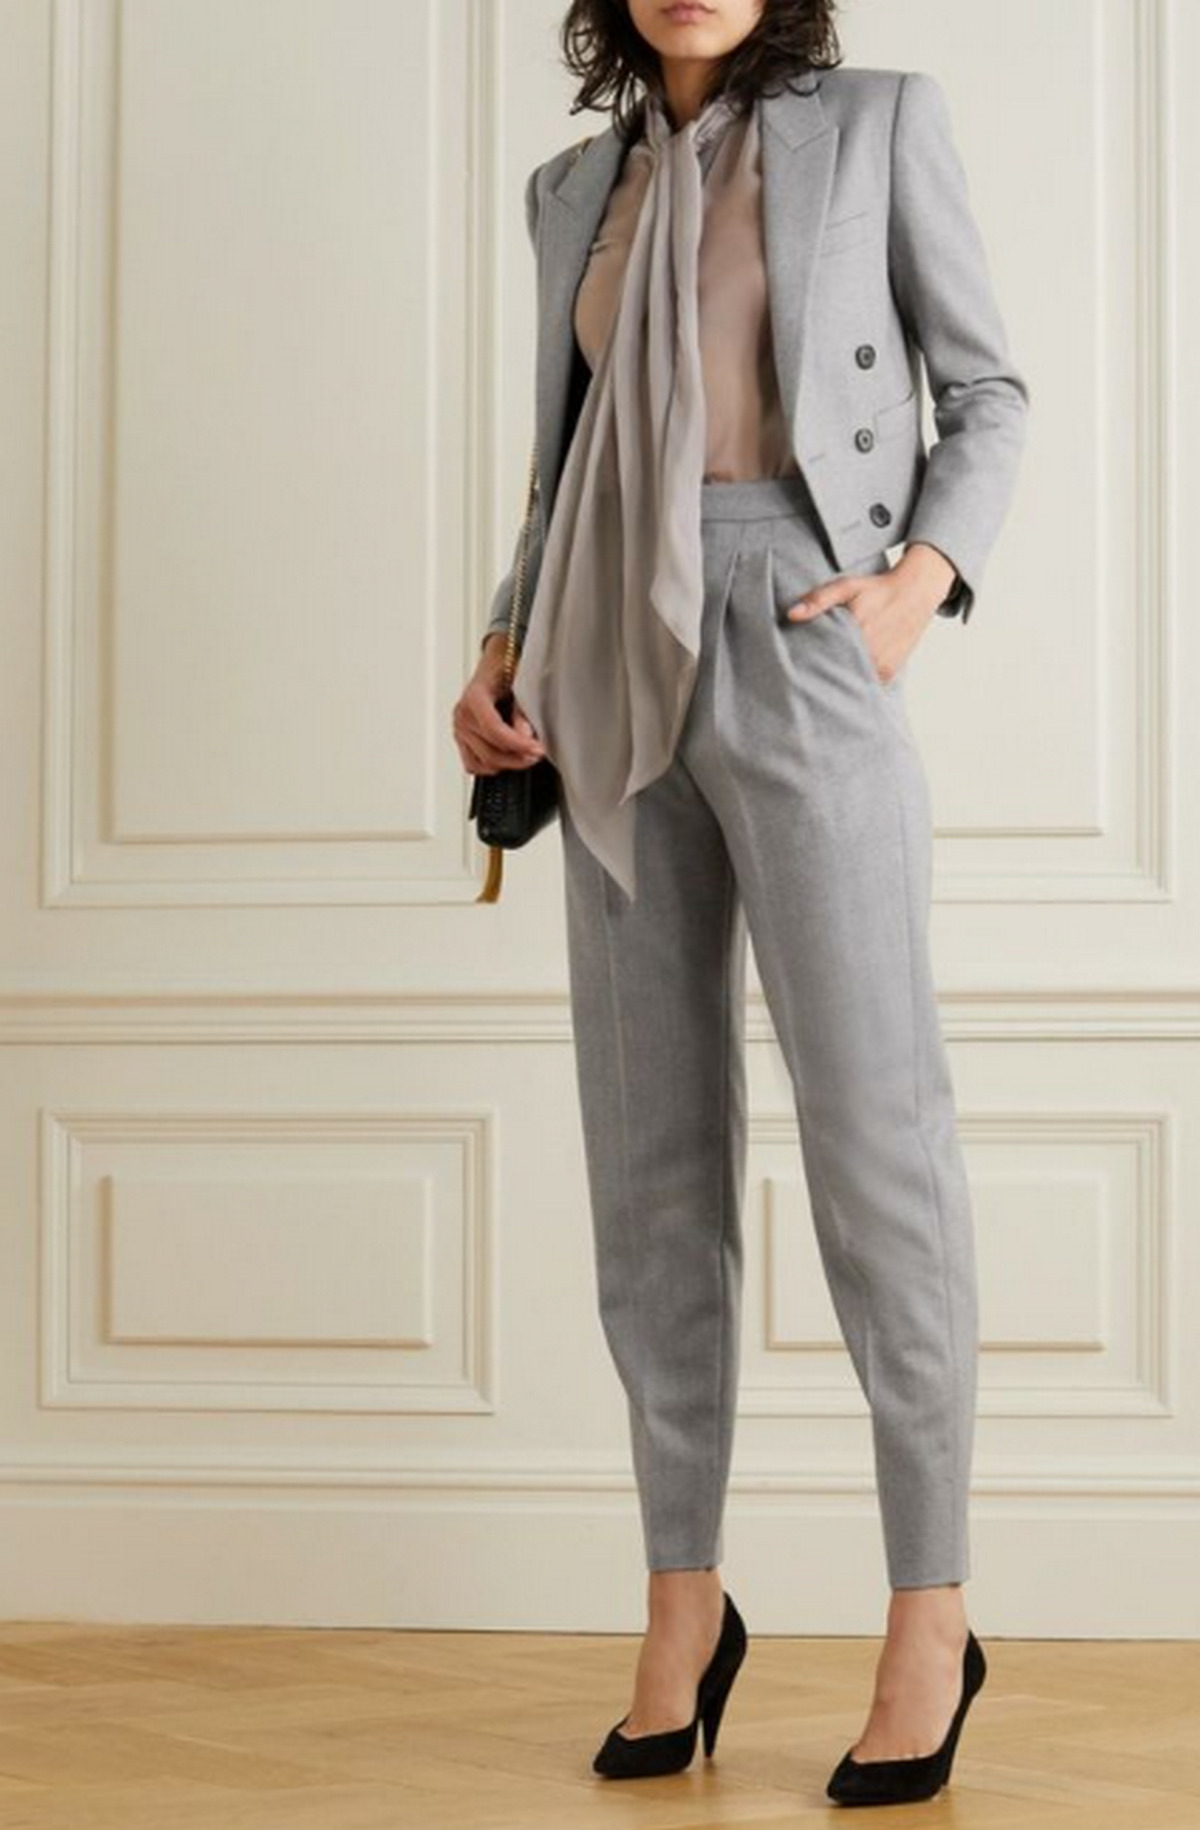 Gray Blazer, Scarves, And Gray Pants For Women